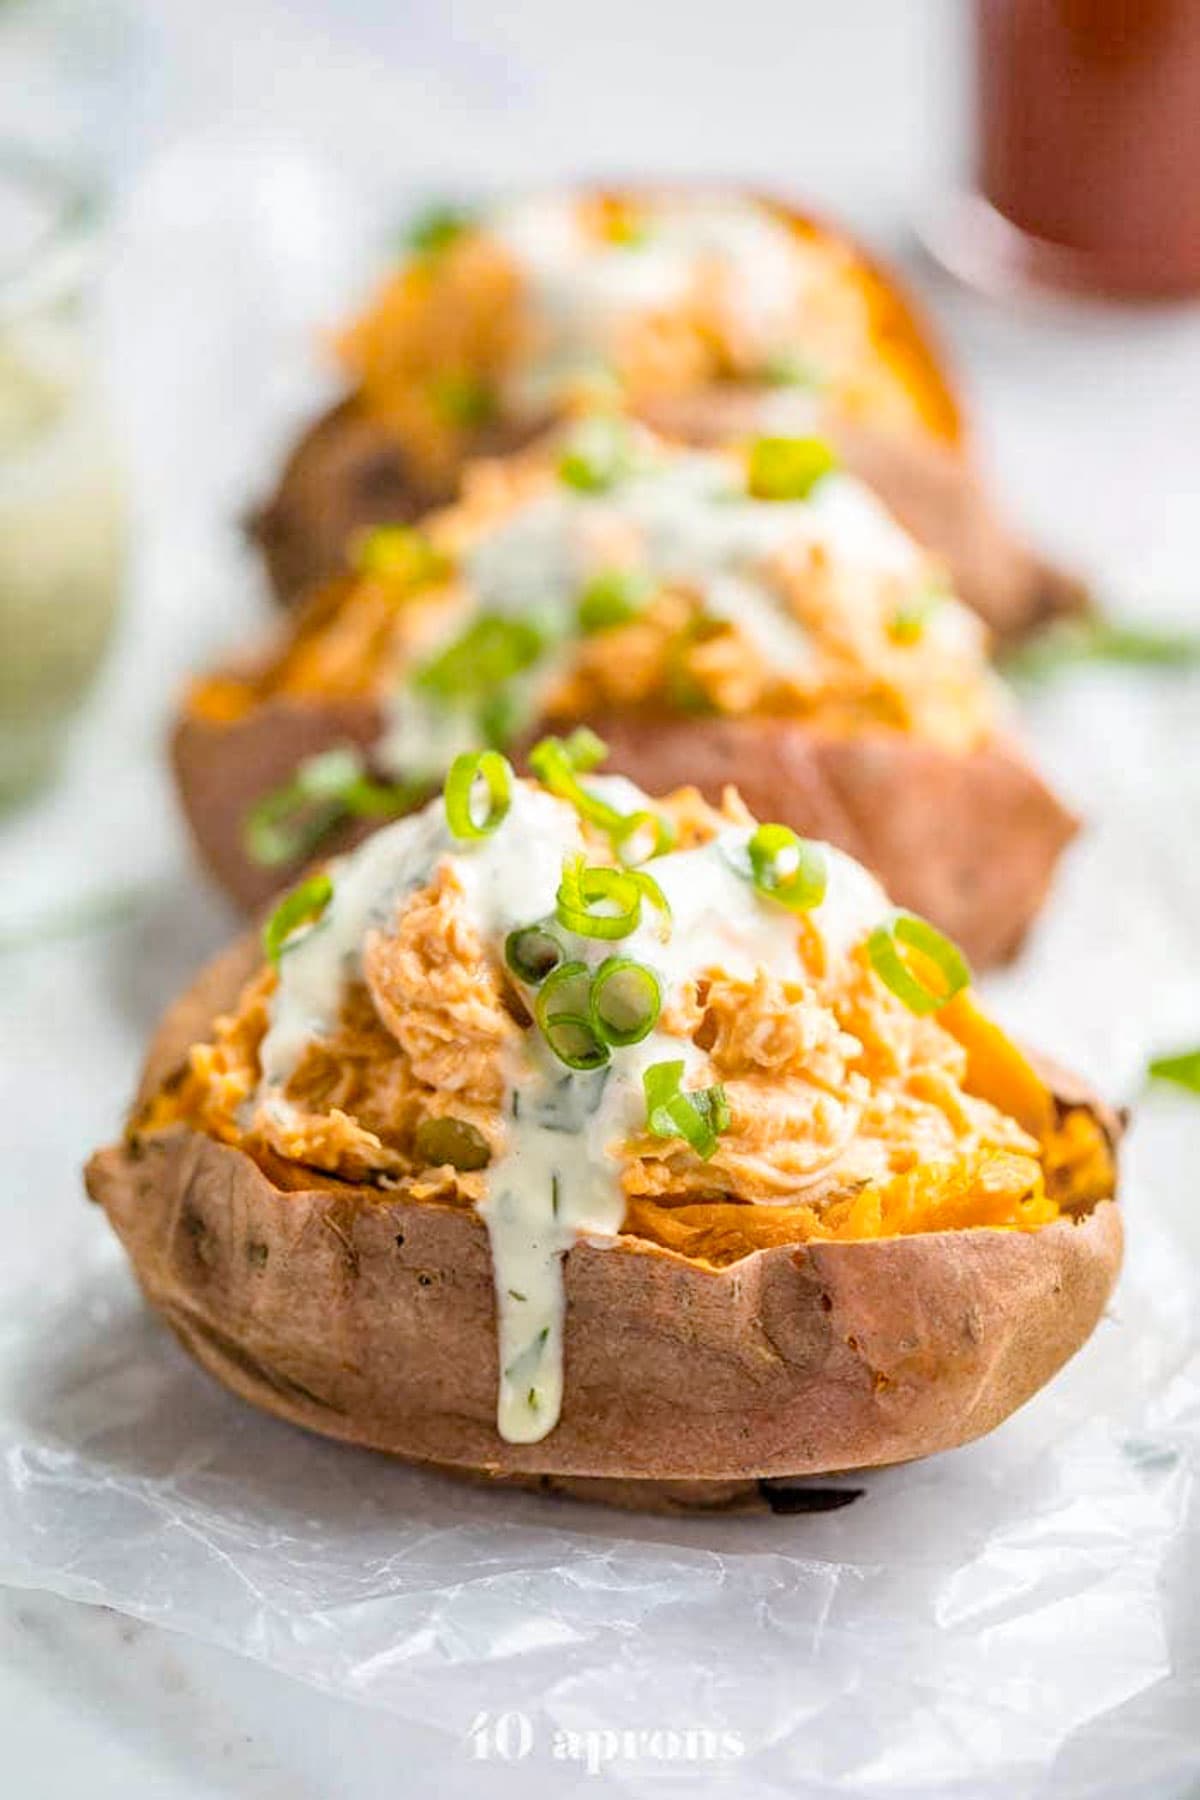 Sweet potatoes stuffed with shredded buffalo chicken topped with a creamy dressing and fresh herbs.